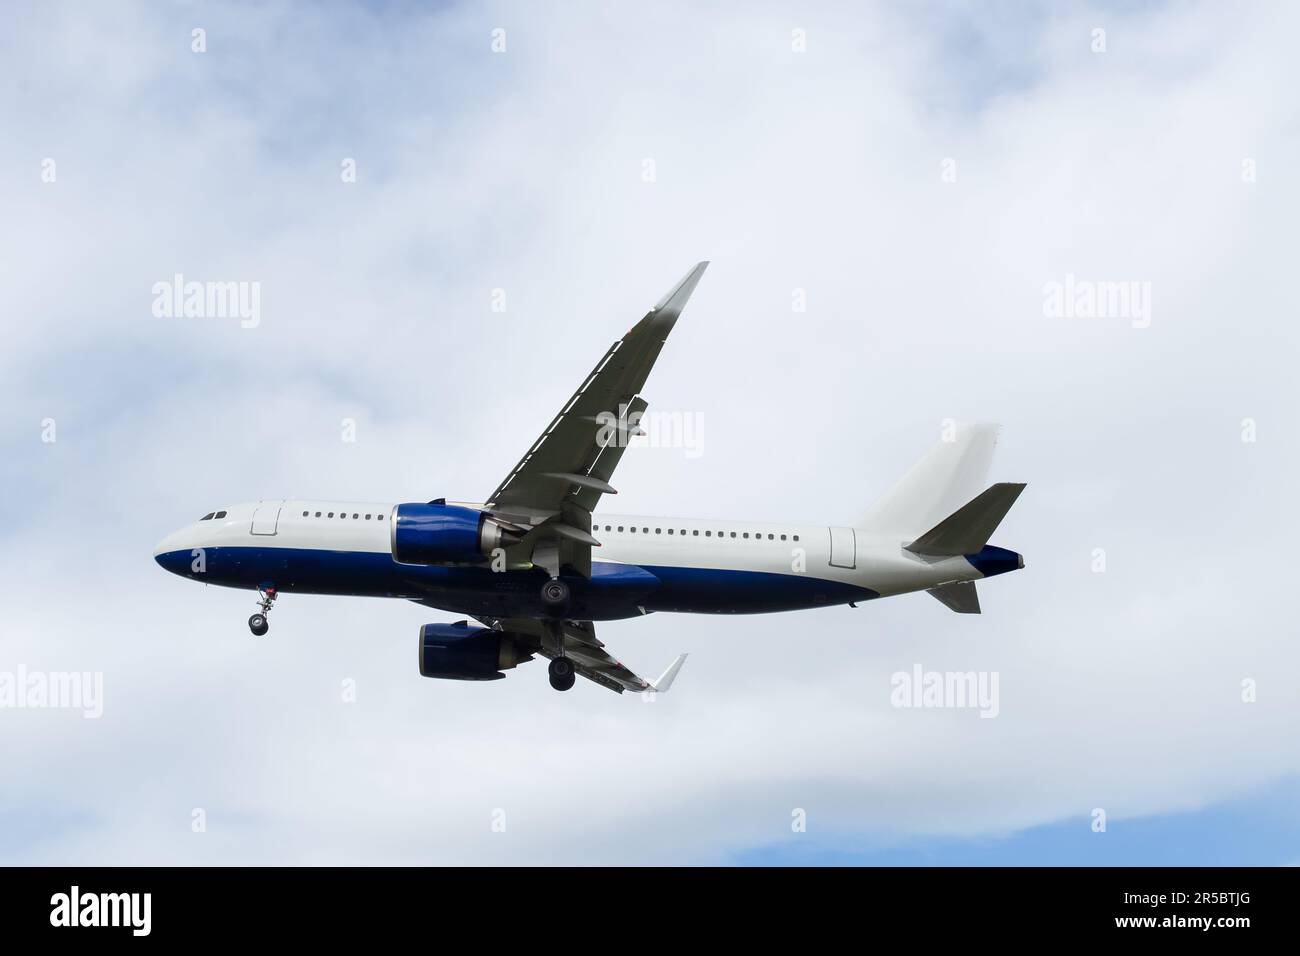 The plane flies in the blue sky with clouds. Stock Photo